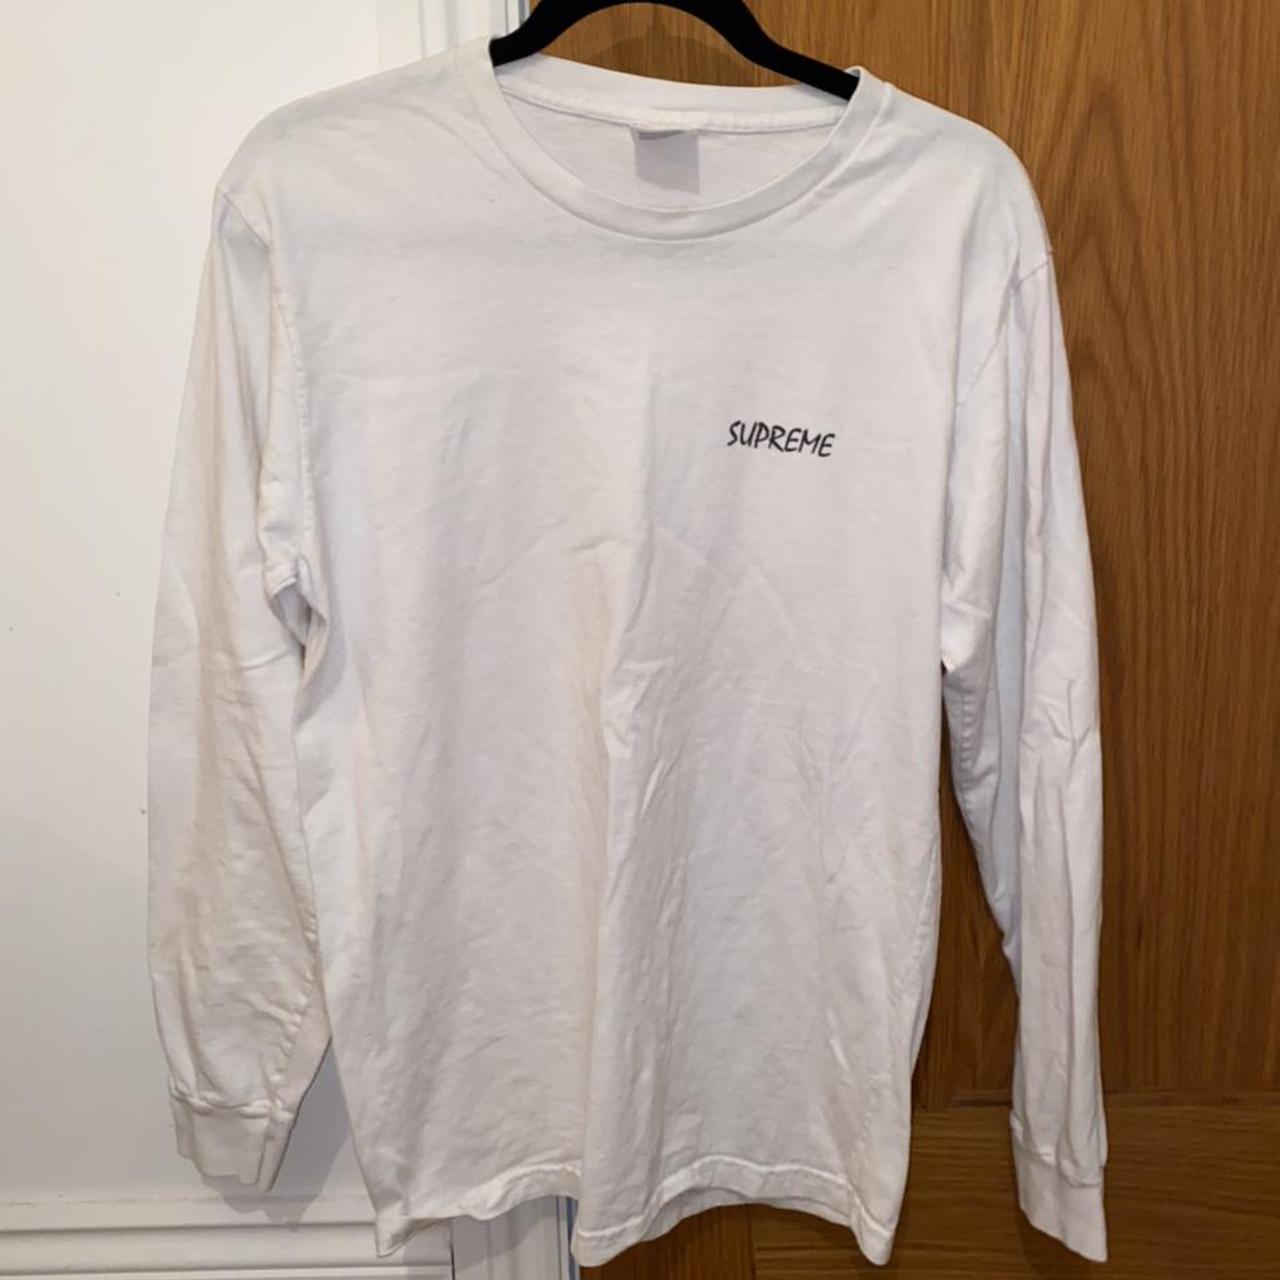 Supreme long sleeve white tee with horse graphic on... - Depop